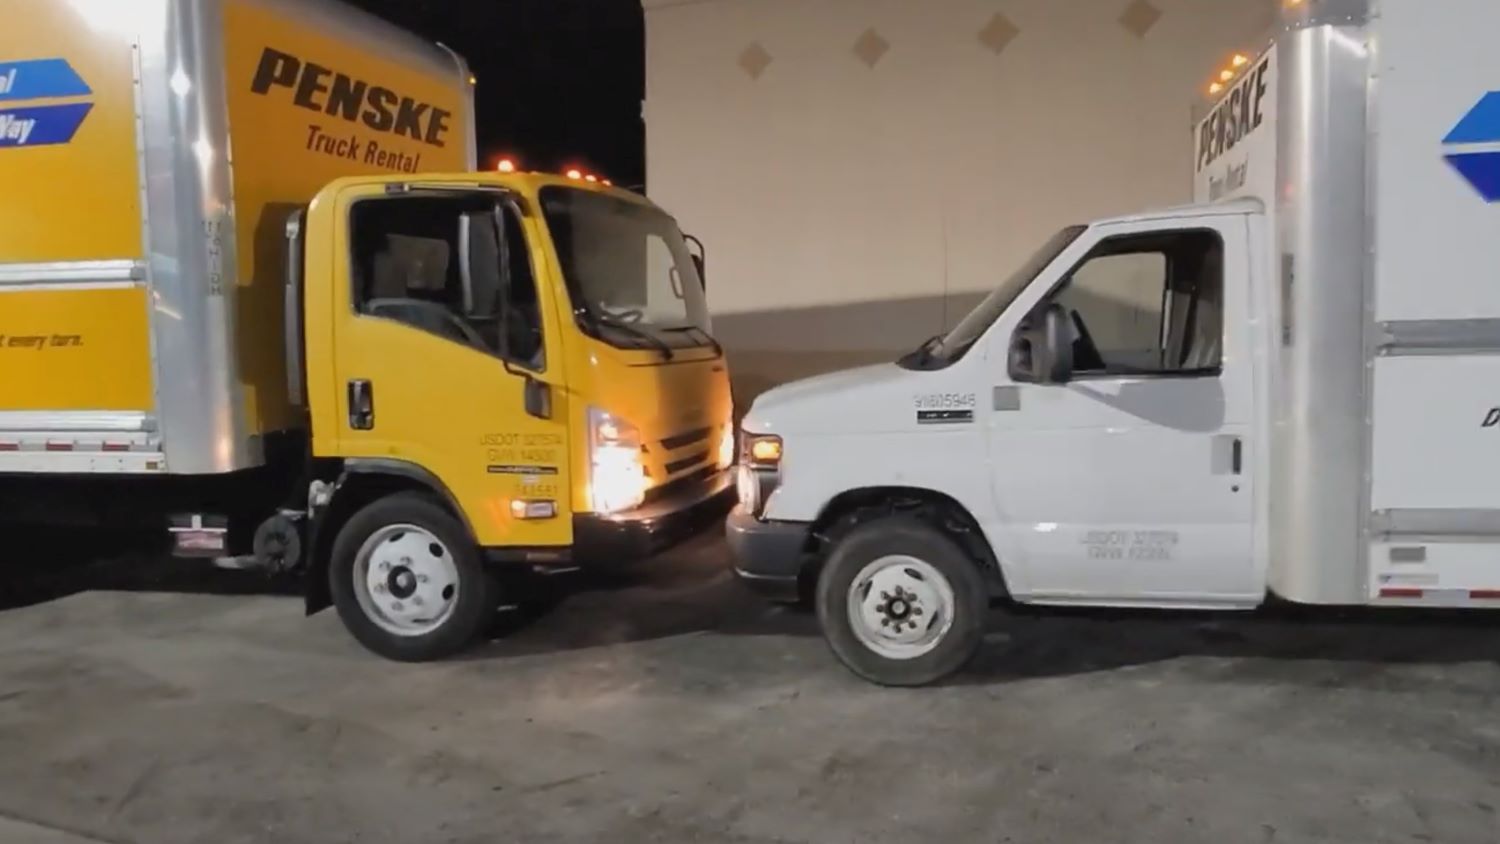 Ford E 350 Moving Truck Takes On Isuzu Npr Hd In Drag Race Video